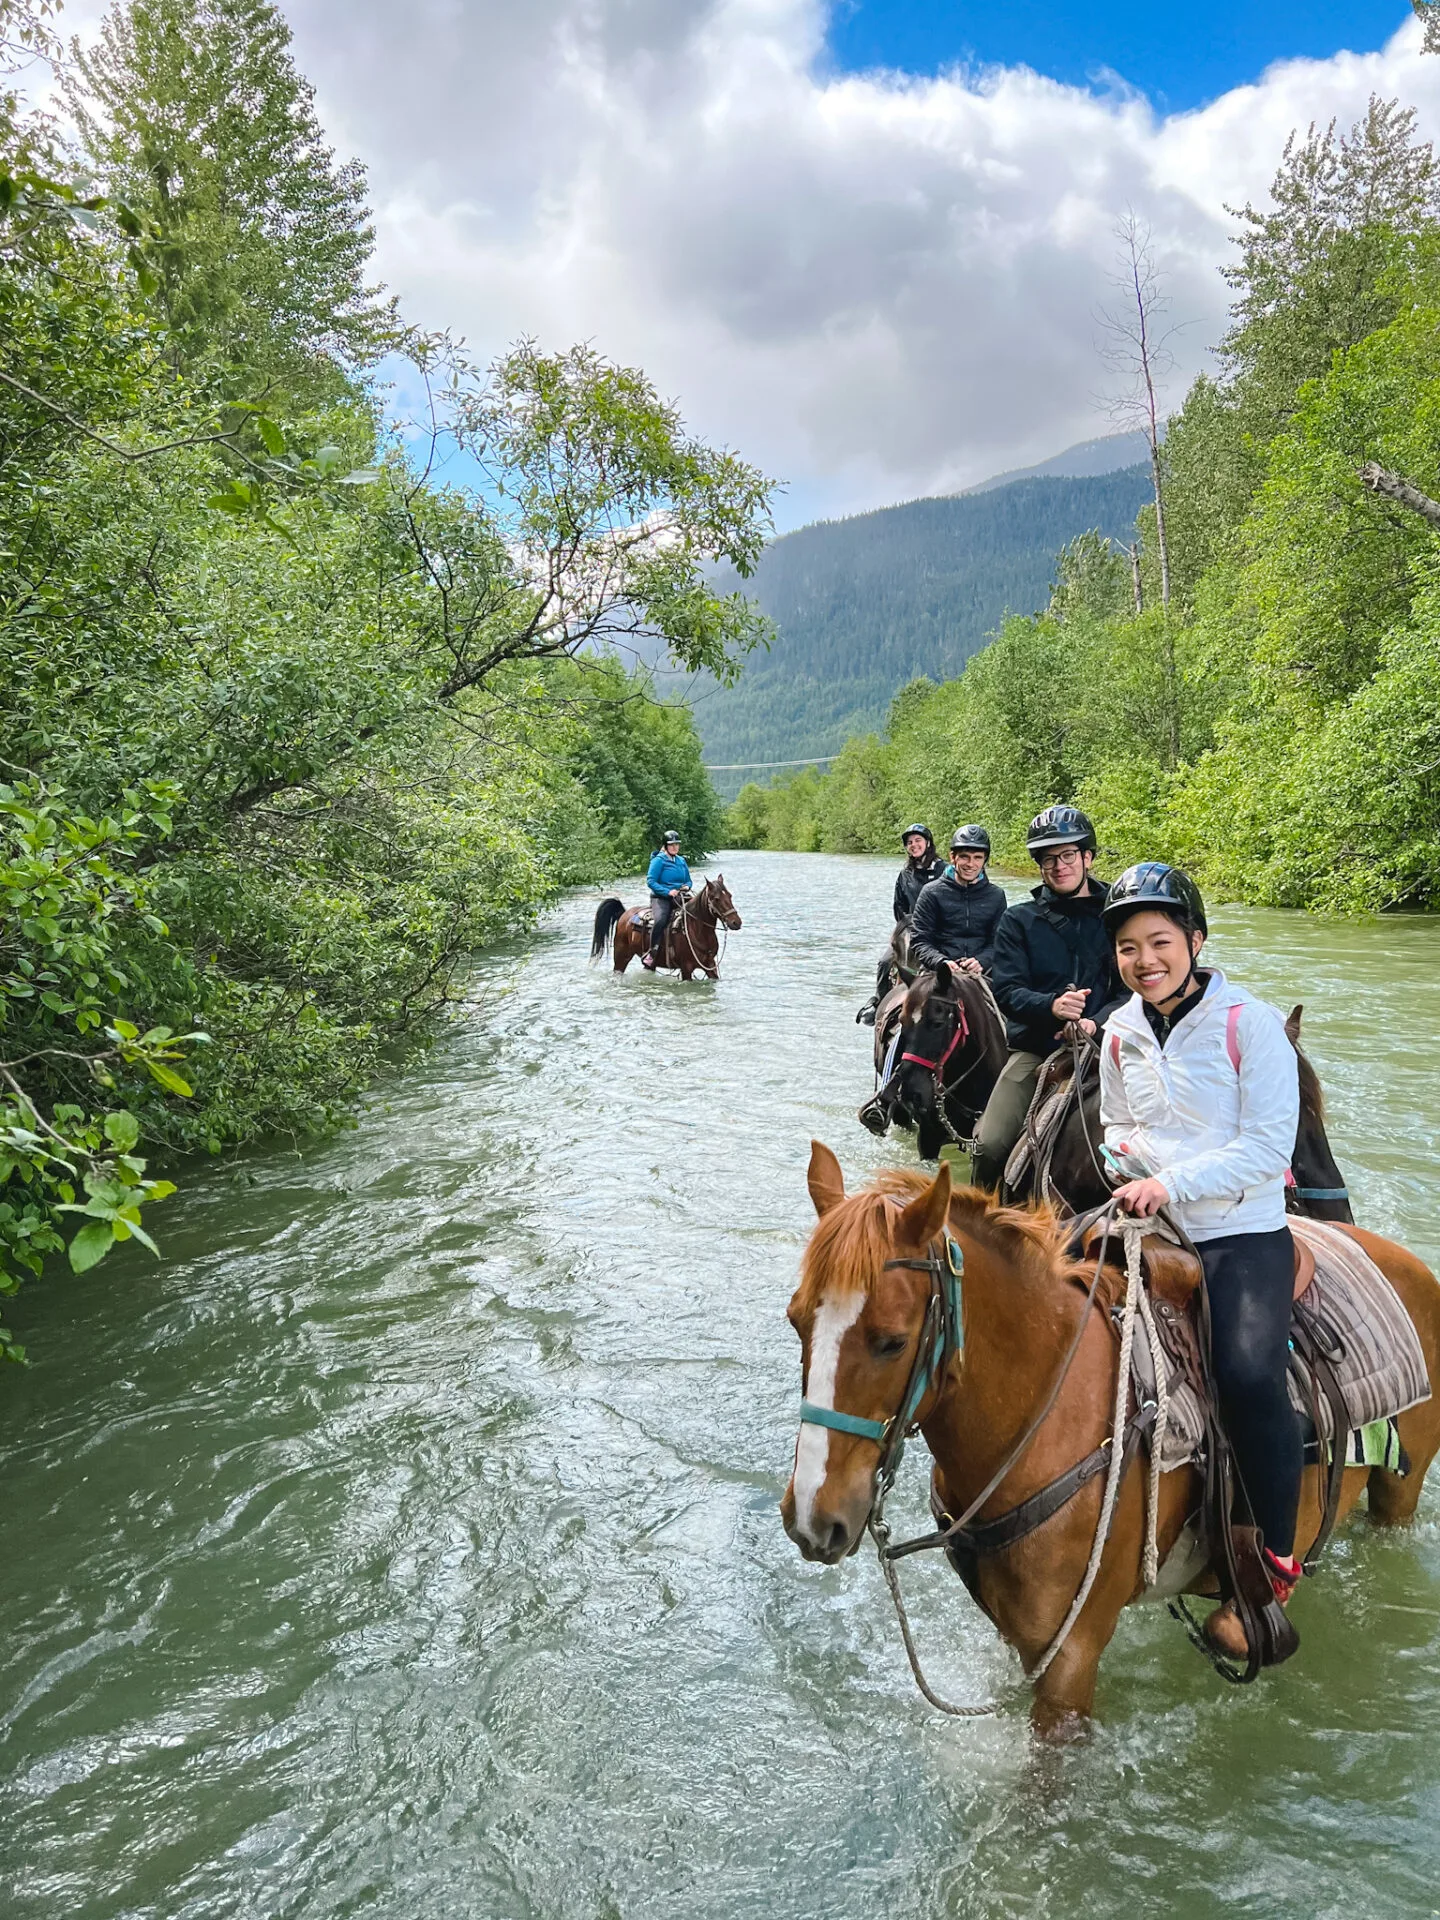 Guided horseback riding tour with Copper Cayuse Outfitters in Pemberton near Whistler, British Columbia